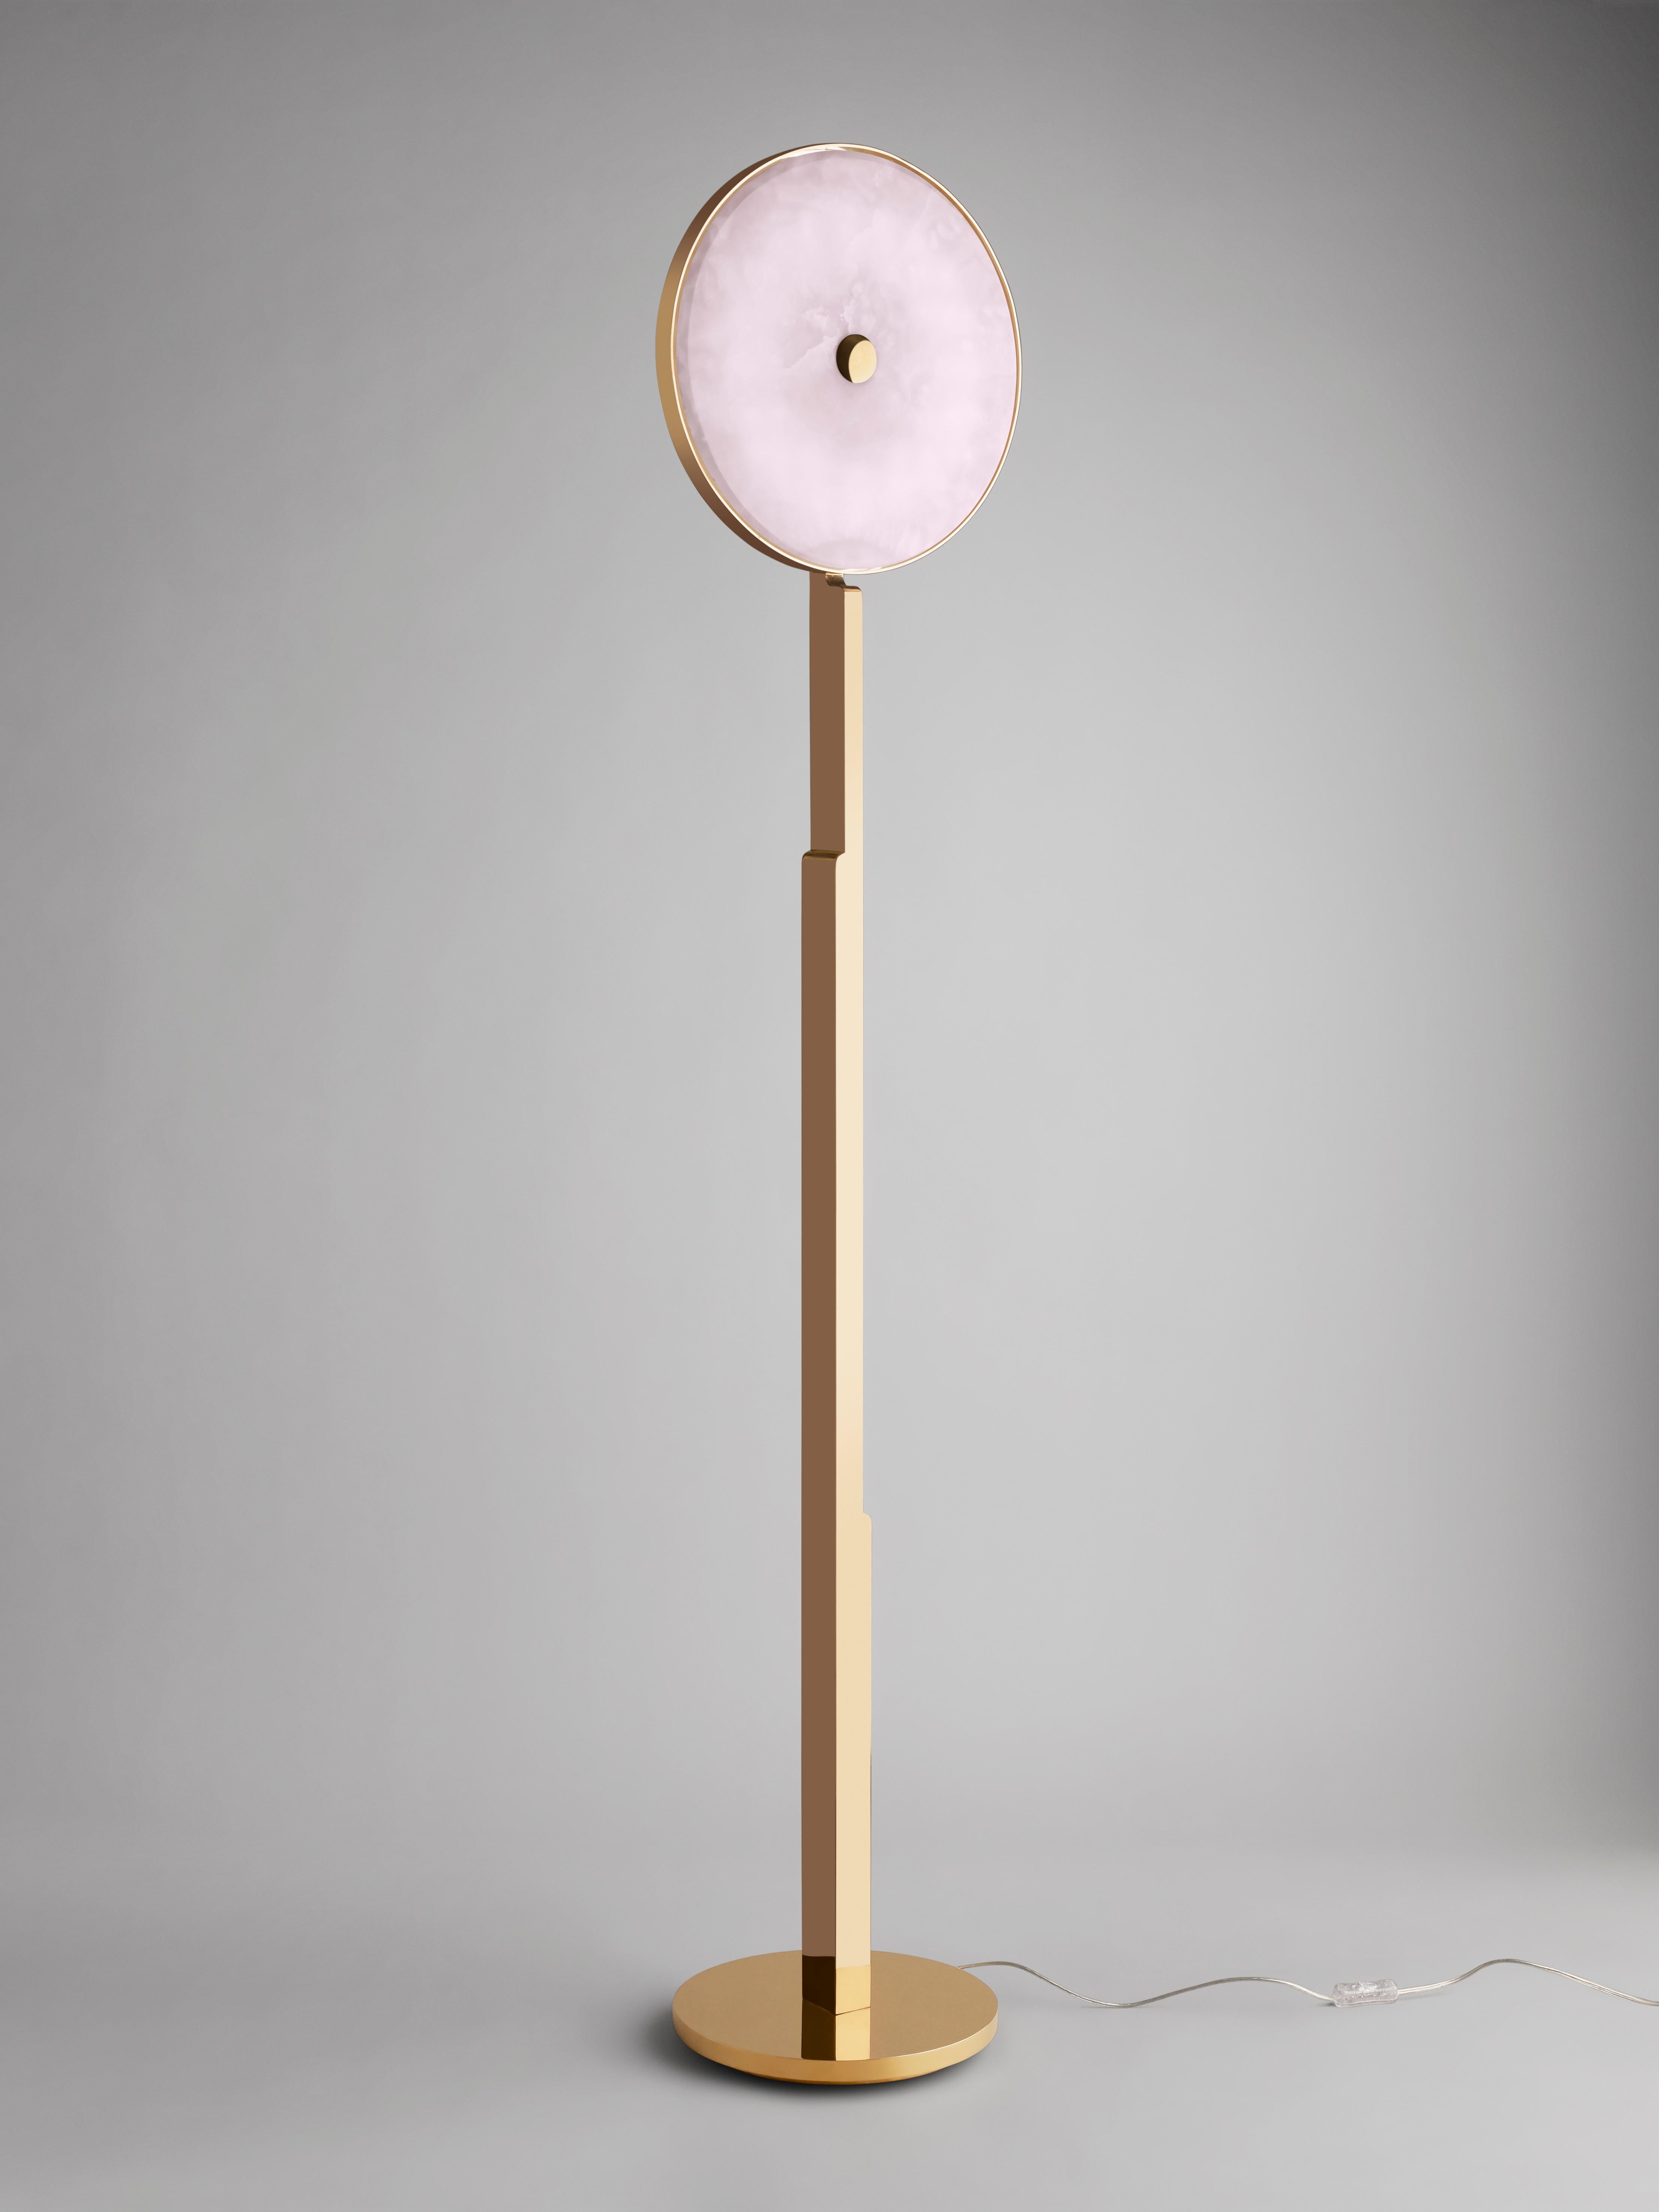 This 'JinShi Pink Jade' glamorous floor light by acclaimed design duo Studio MVW is a true jewel for the home. It encompasses a retro-lit head with a diameter of 37 cm/14.5 inches in natural pink jade, an exceptional gemstone with a sumptuous powder